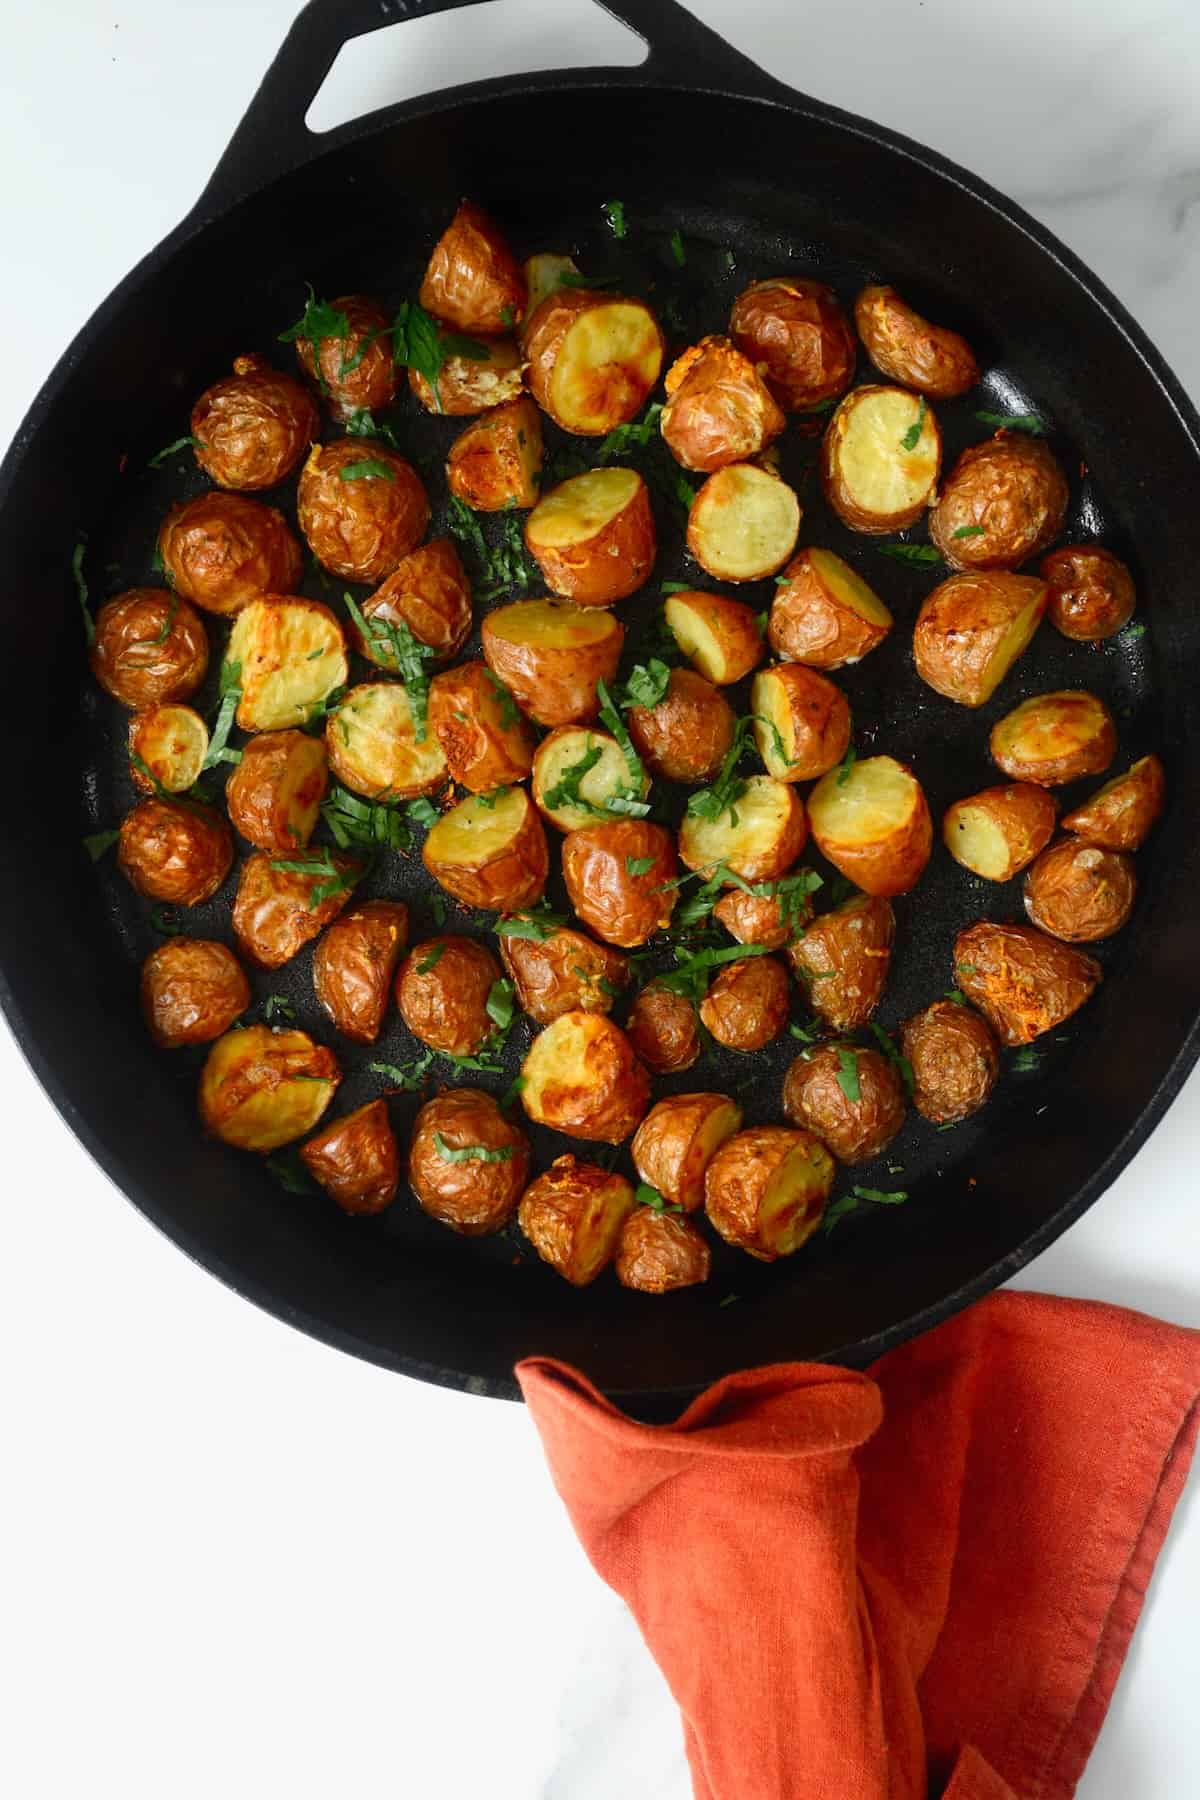 https://www.alphafoodie.com/wp-content/uploads/2022/09/Roasted-New-Red-Potatoes-Main1.jpeg